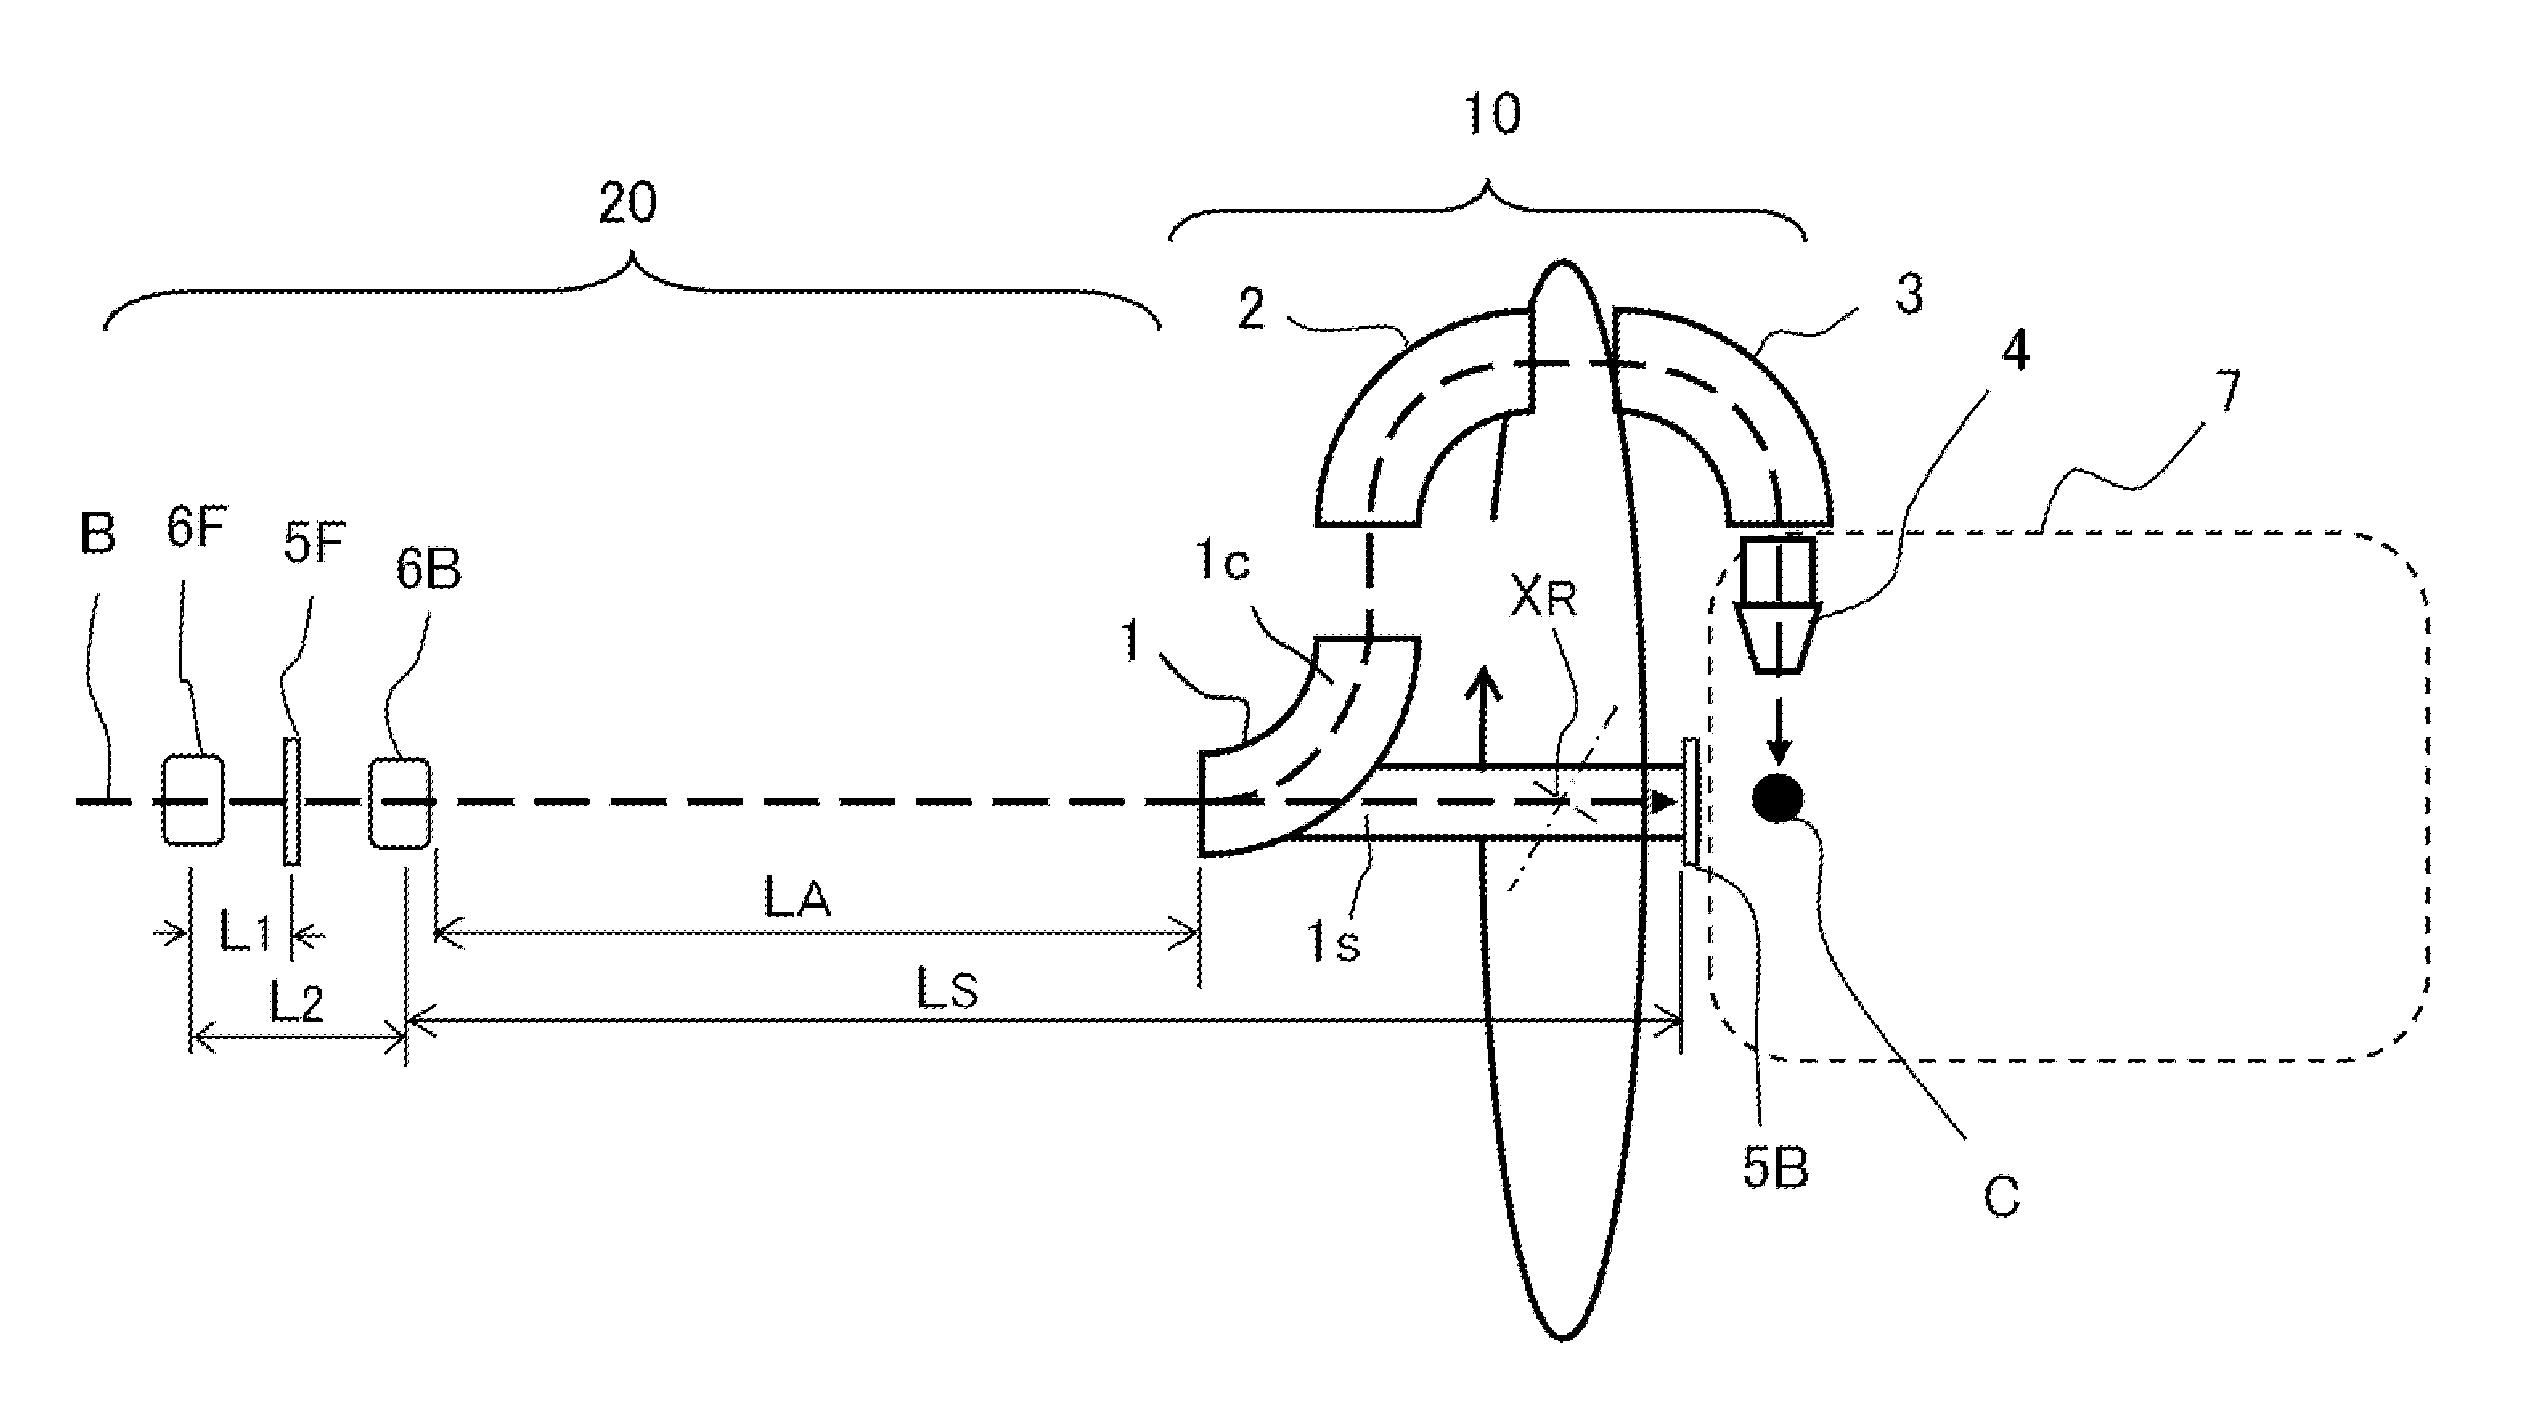 Particle therapy apparatus